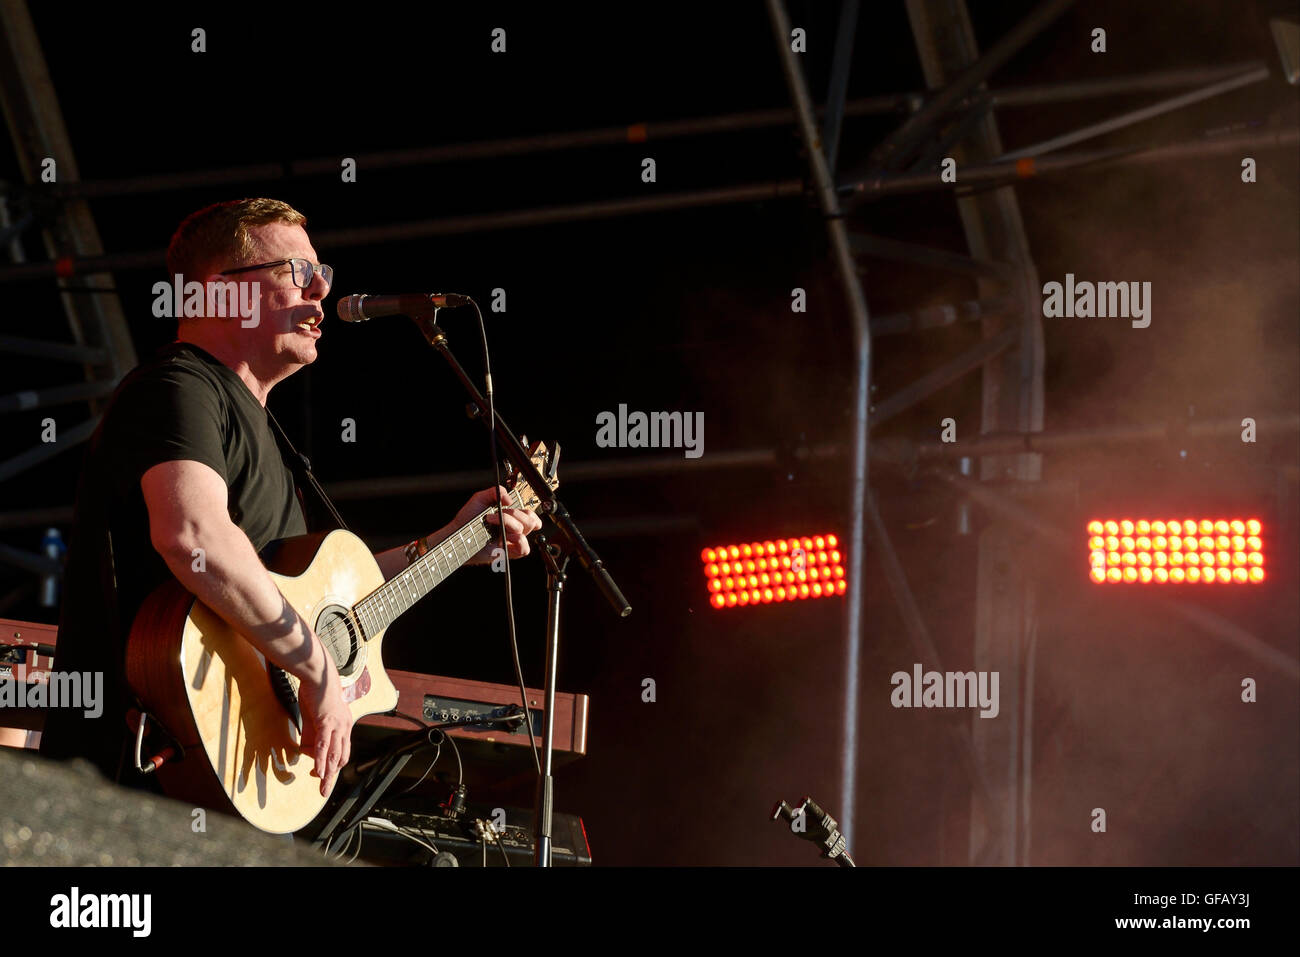 Carfest North, Bolesworth, Cheshire, UK. 30th July 2016. The Proclaimers performing on the main stage. The event is the brainchild of Chris Evans and features 3 days of cars, music and entertainment with profits being donated to the charity Children in Need. Andrew Paterson/Alamy Live News Stock Photo